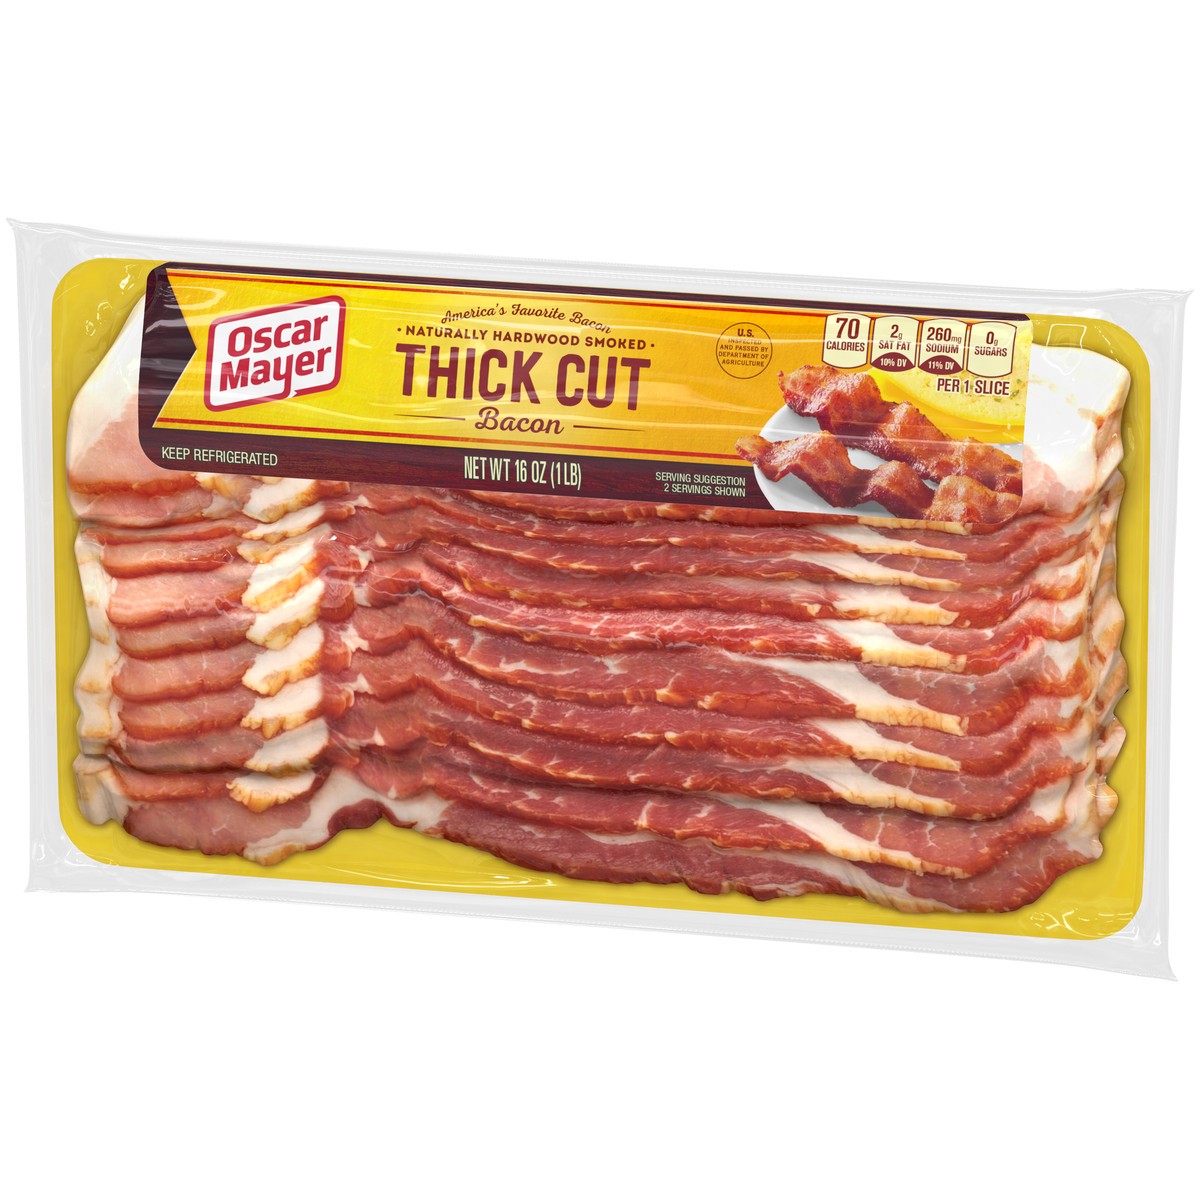 slide 8 of 15, Oscar Mayer Naturally Hardwood Smoked Thick Cut Bacon, 16 oz Pack, 11-13 slices, 16 oz